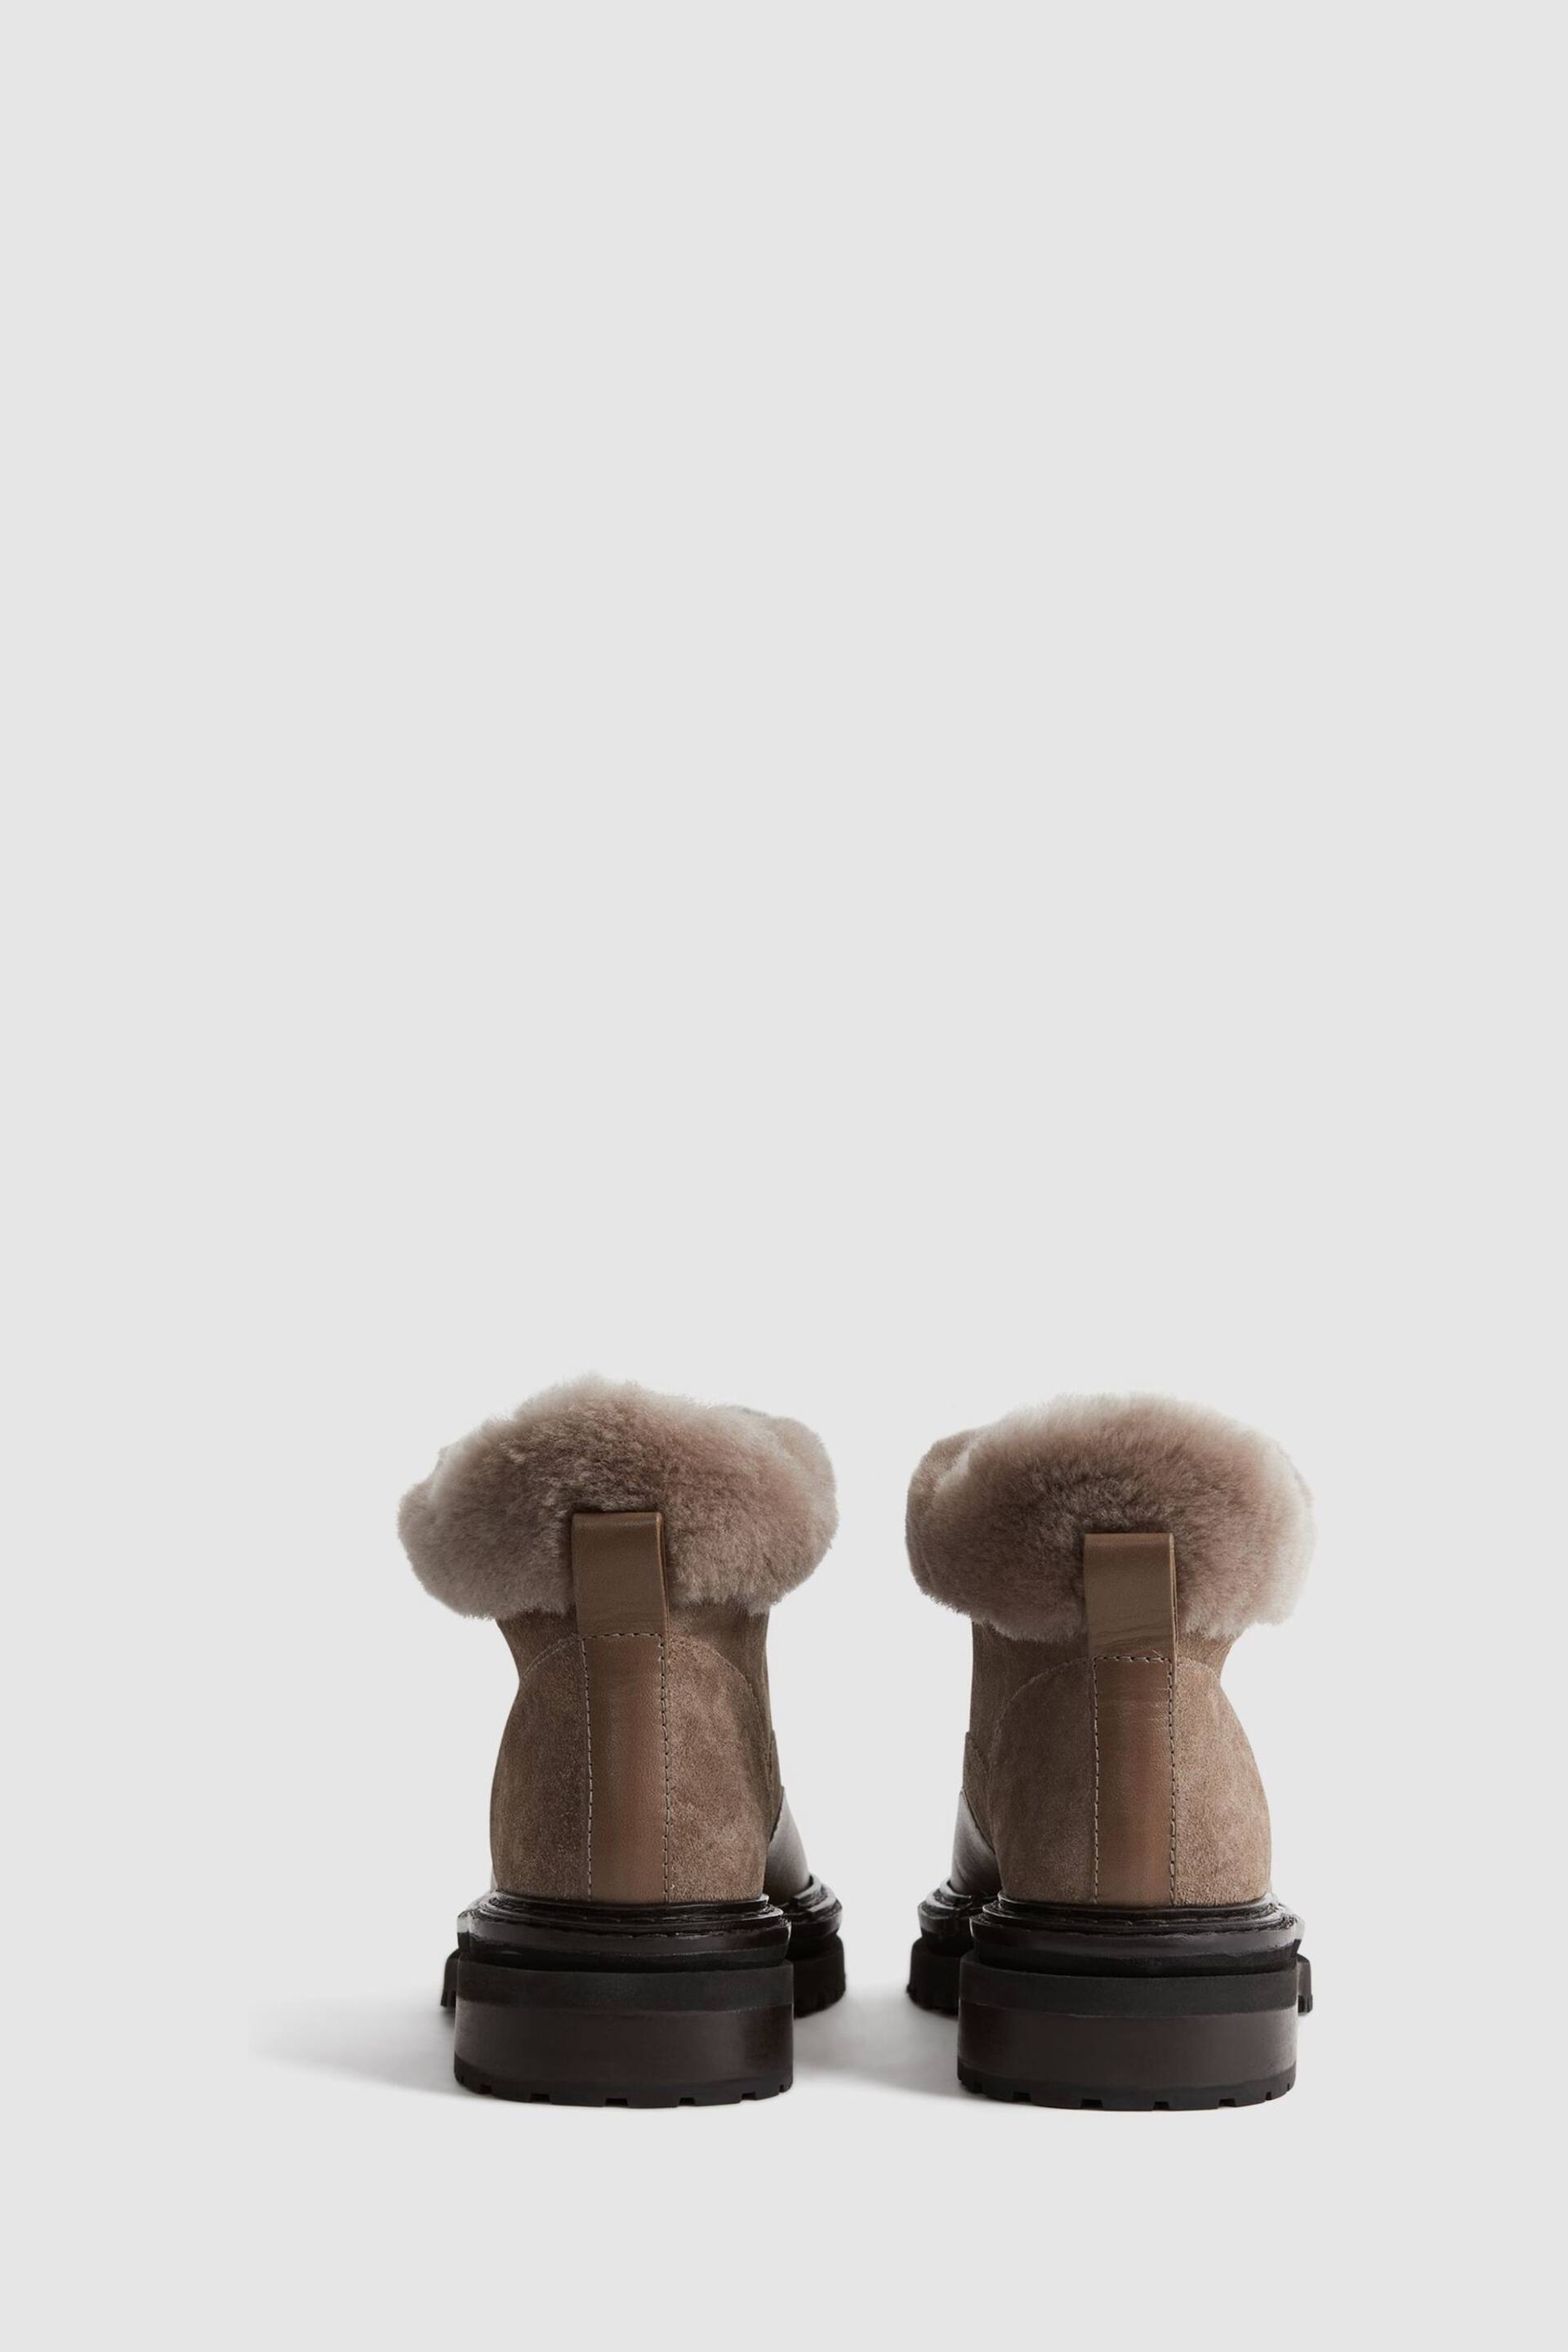 Reiss Mink Leonie Suede Faux Fur Hiking Boots - Image 4 of 5